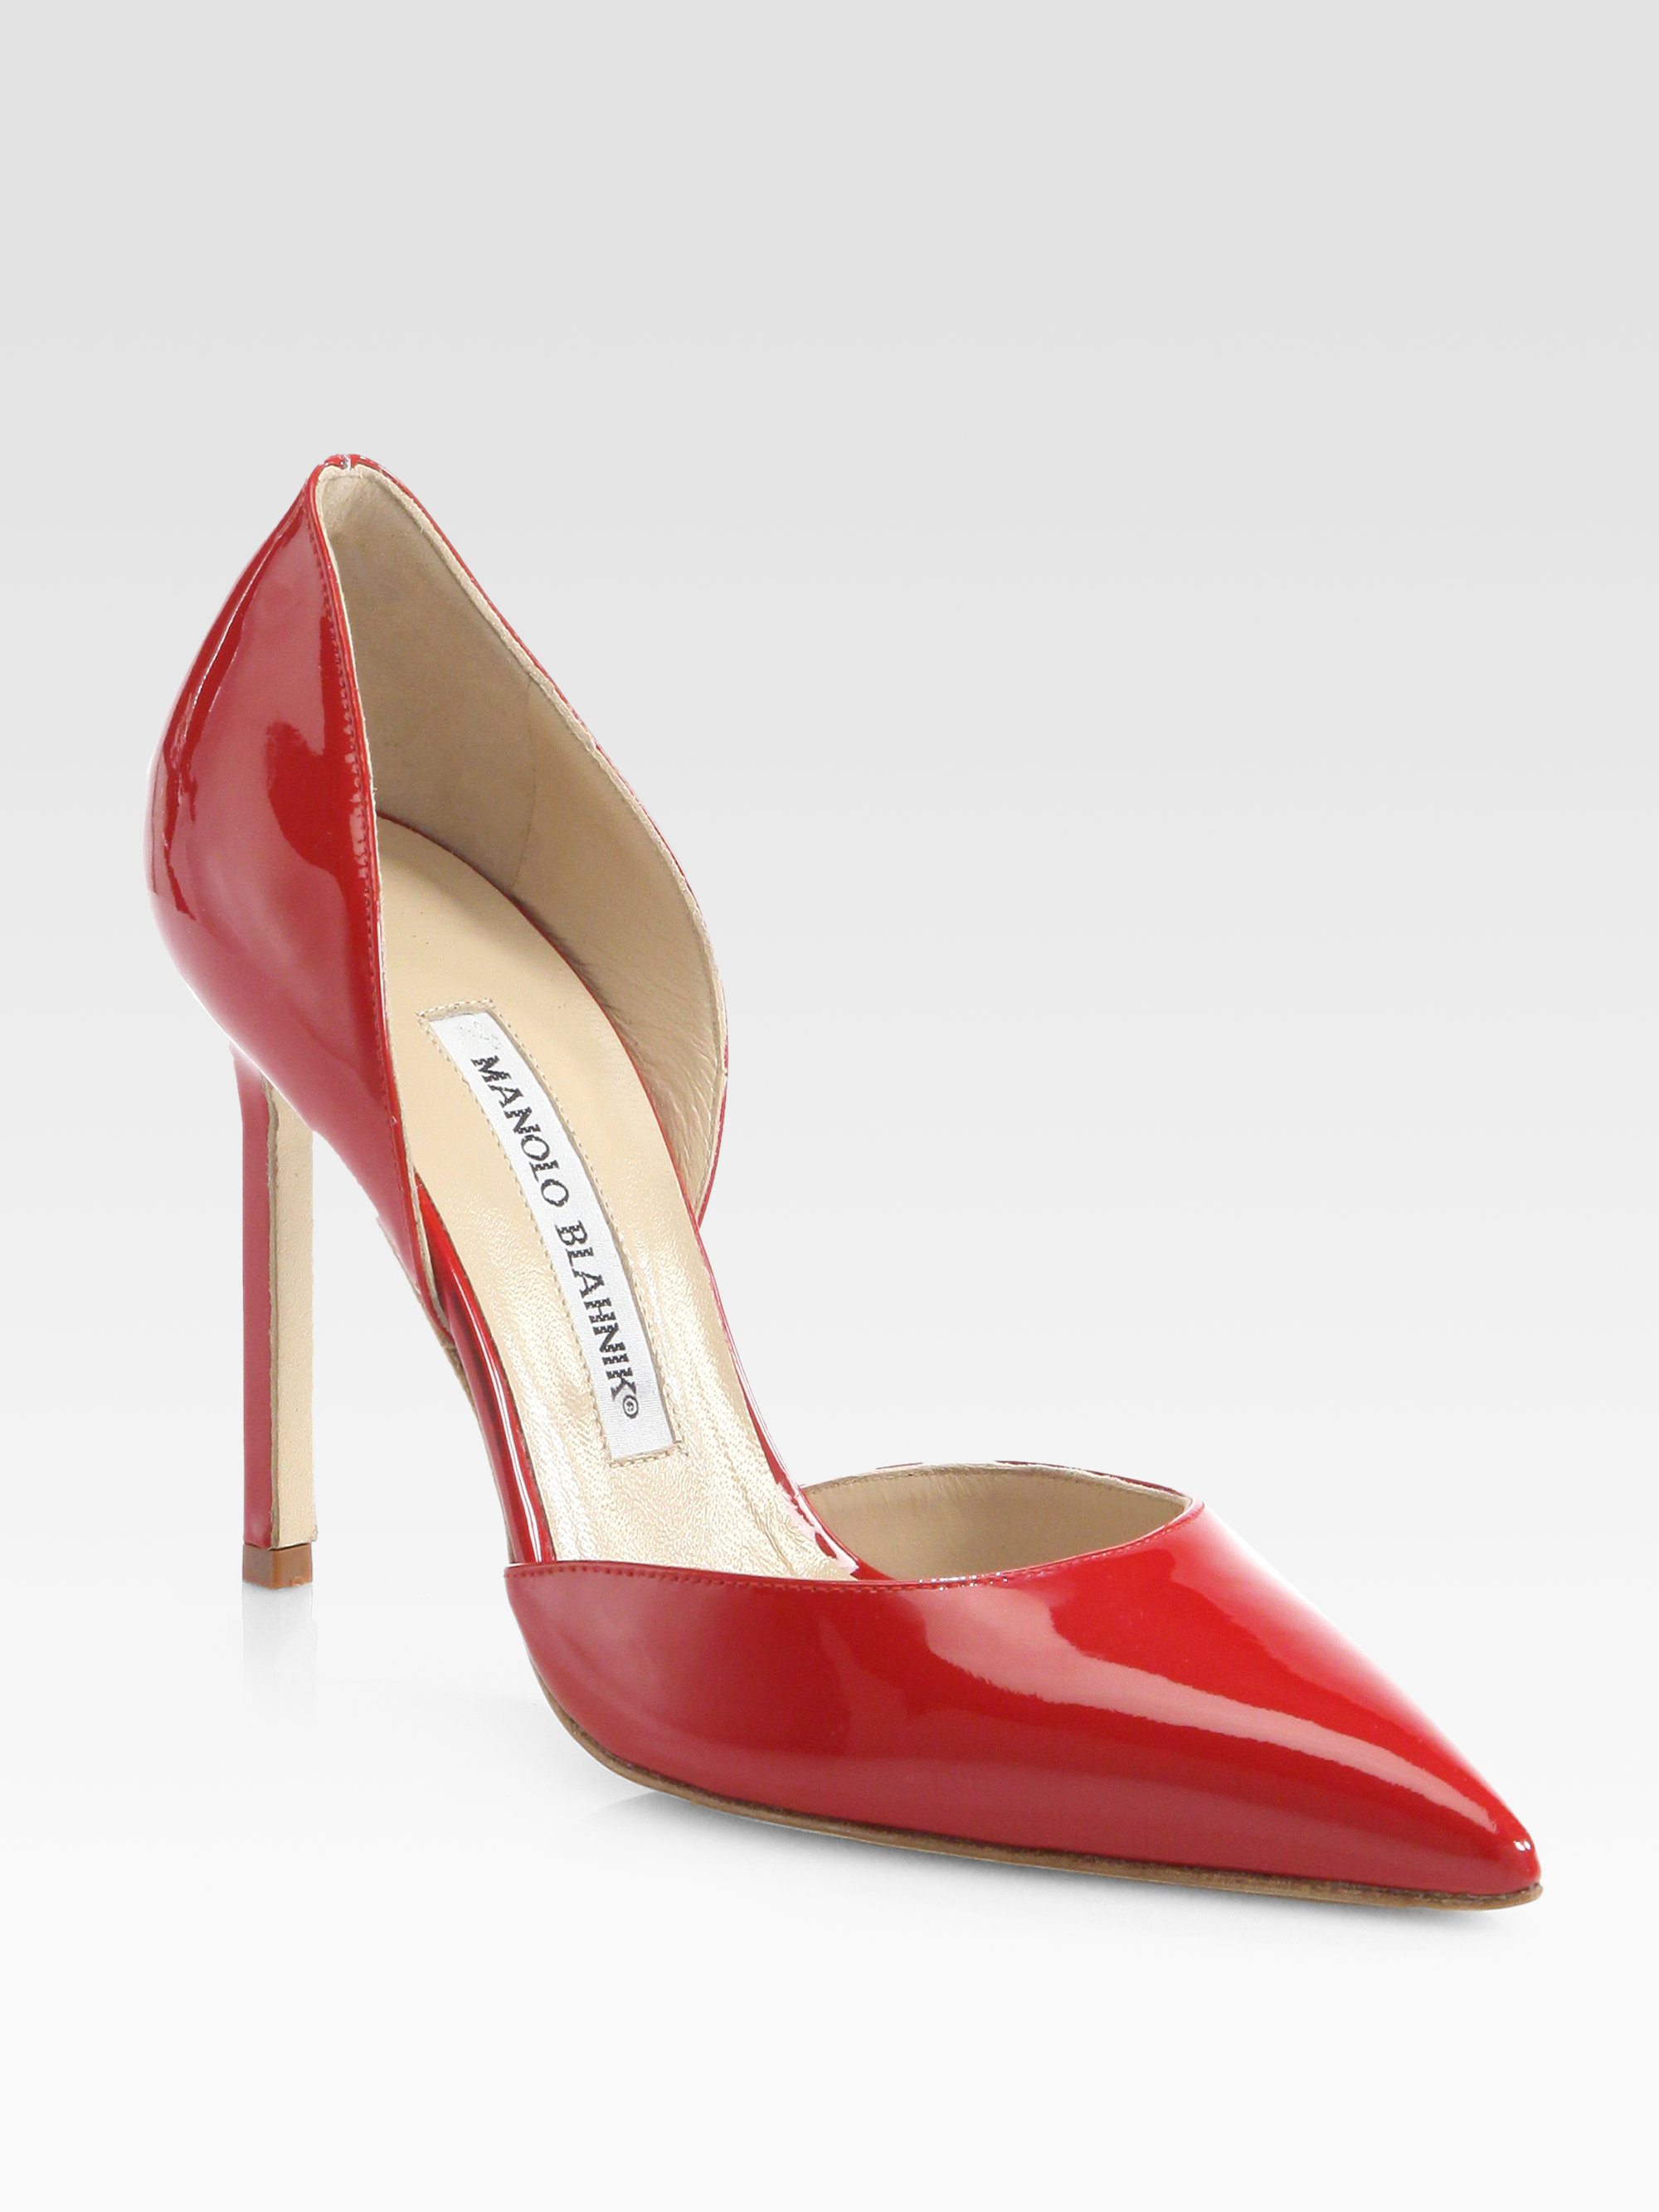 Manolo Blahnik Tayler Patent Leather D'orsay Pumps in Red Patent (Red